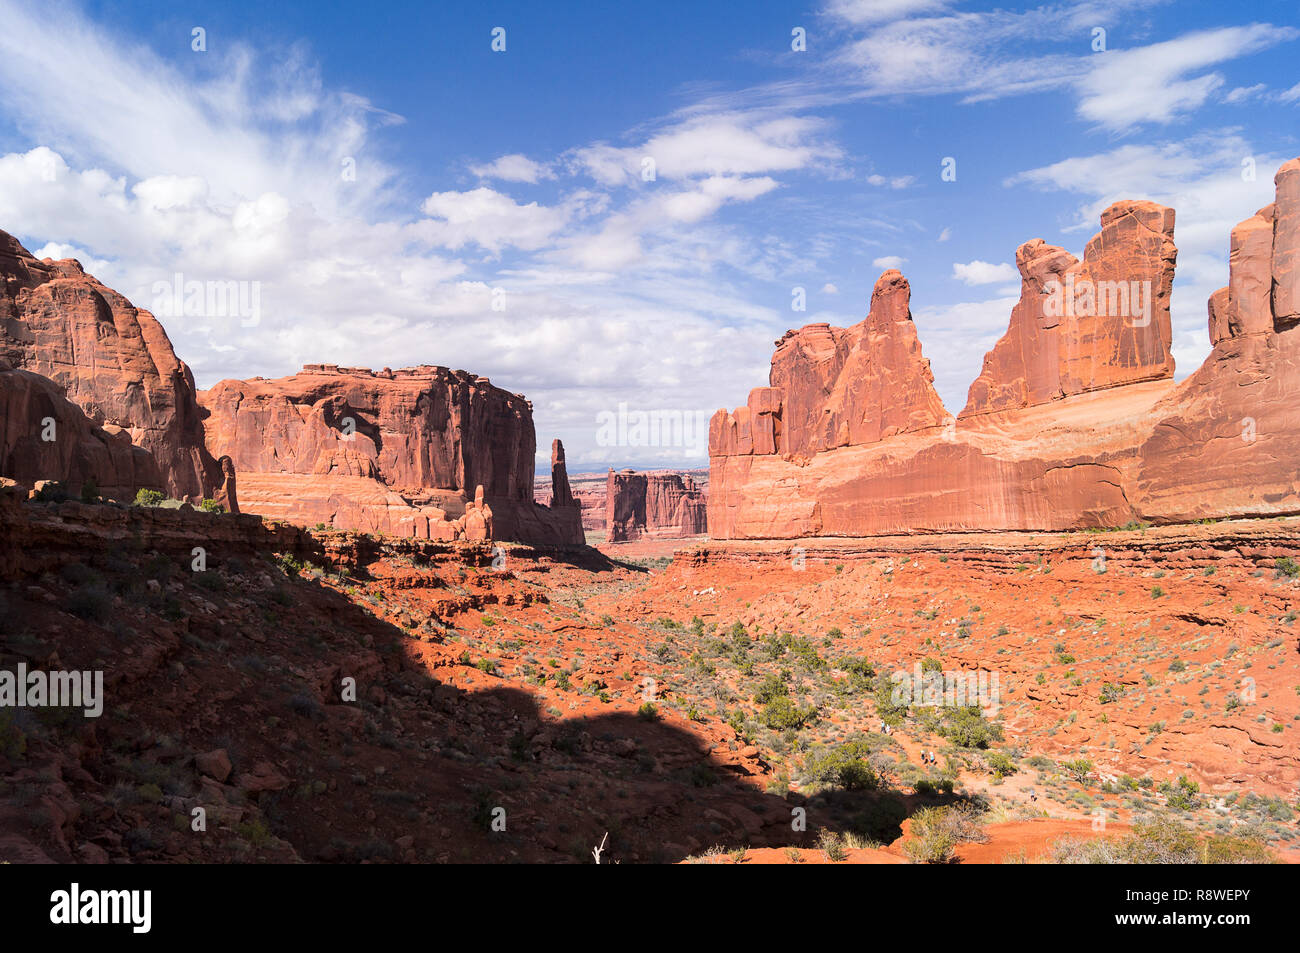 The park avenue trail in the Arches National Park in Utah, Usa. Stock Photo